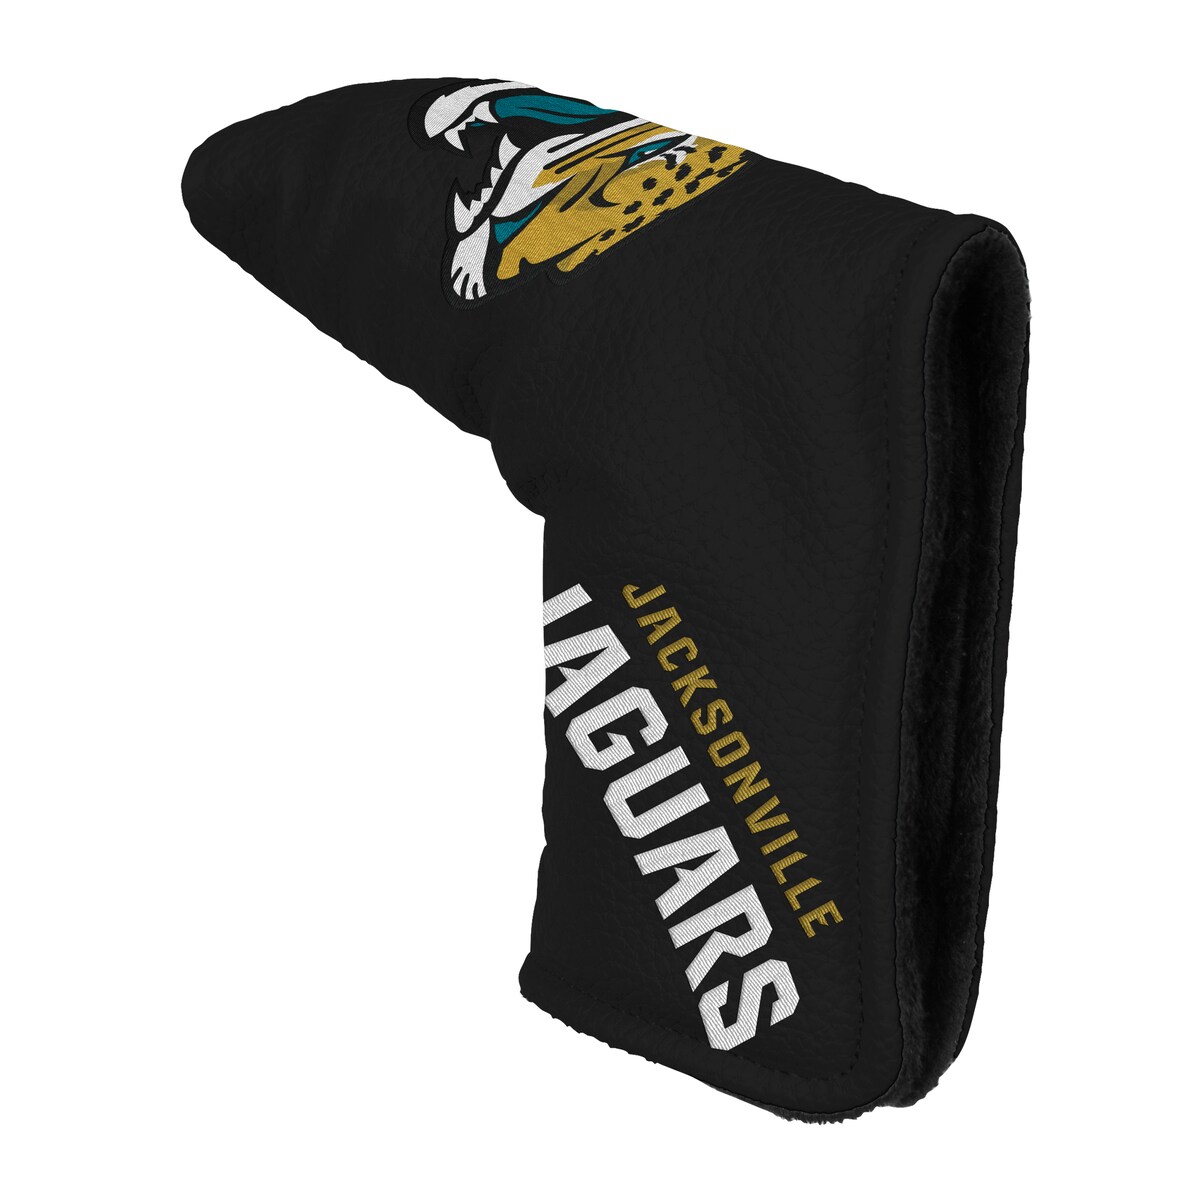 Showcase your devout Jacksonville Jaguars fandom out on the green with this blade putter cover from WinCraft. On top of shielding your club against minor scratches and dints, it features bold Jacksonville Jaguars graphics others can't miss while you're playing a round of 9 or 18.Fits most standard blade puttersImportedOfficially licensedSurface washableBrand: WinCraftEmbroidered graphics